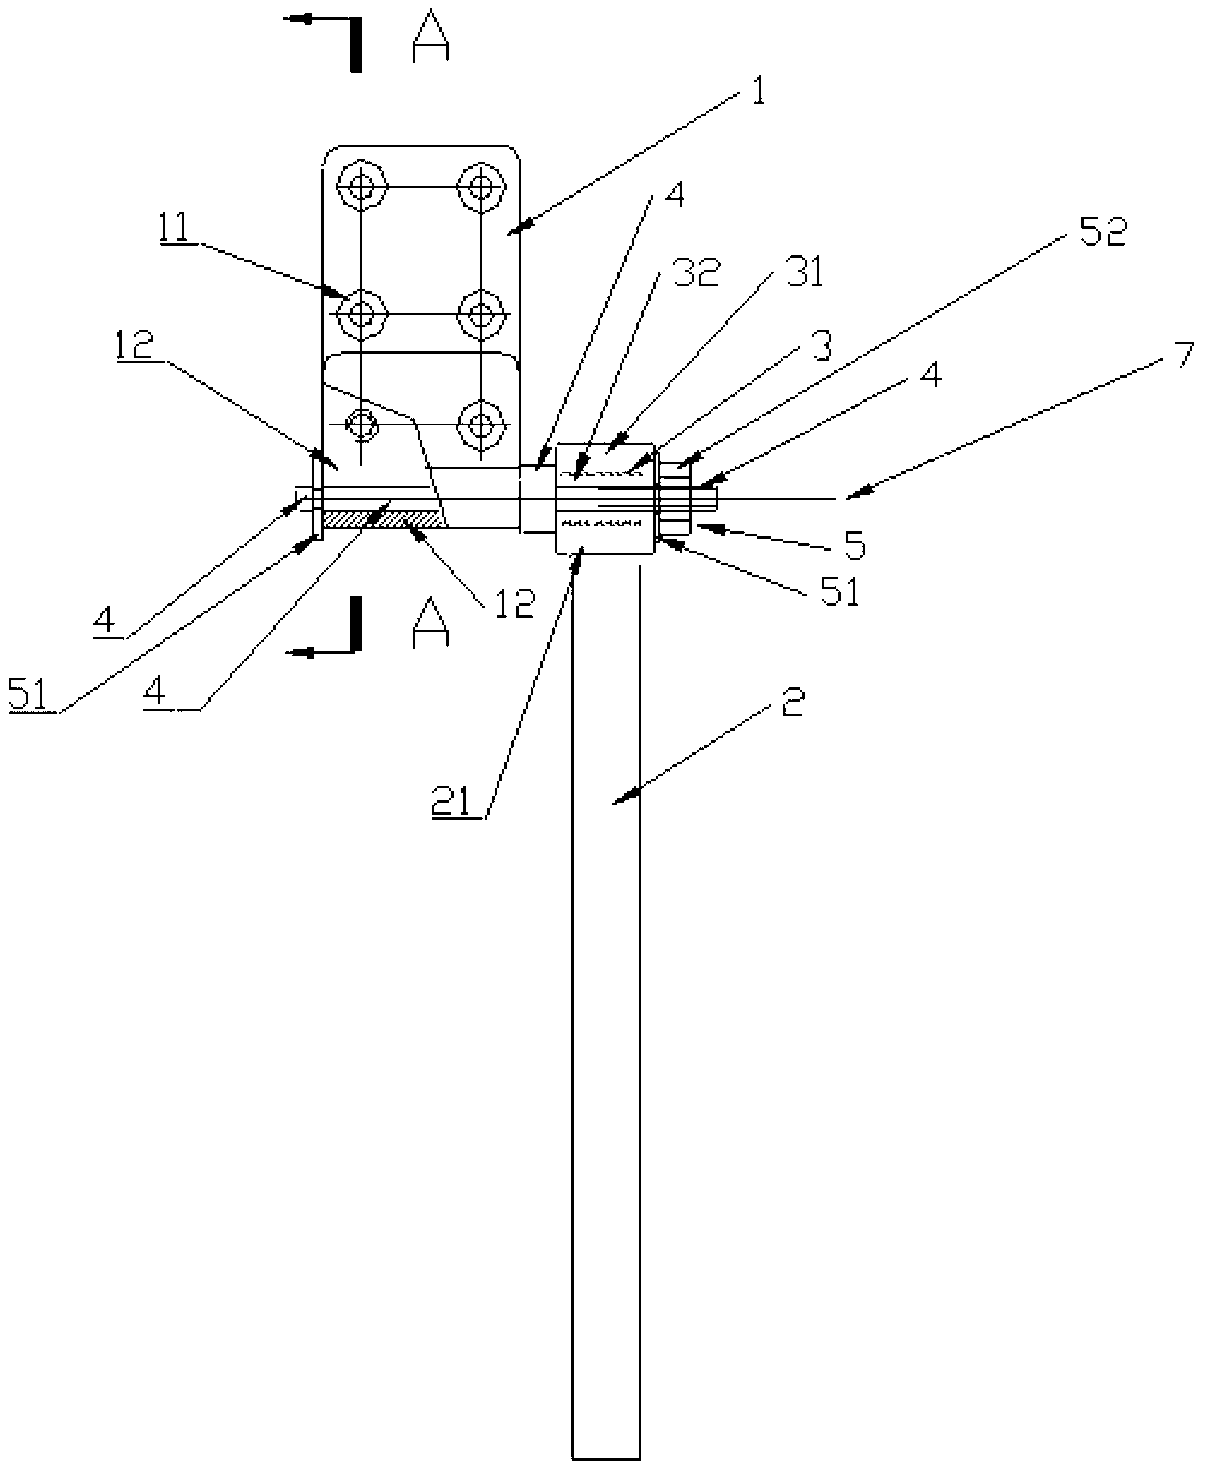 Display screen supporting frame with adjustable tilt angle